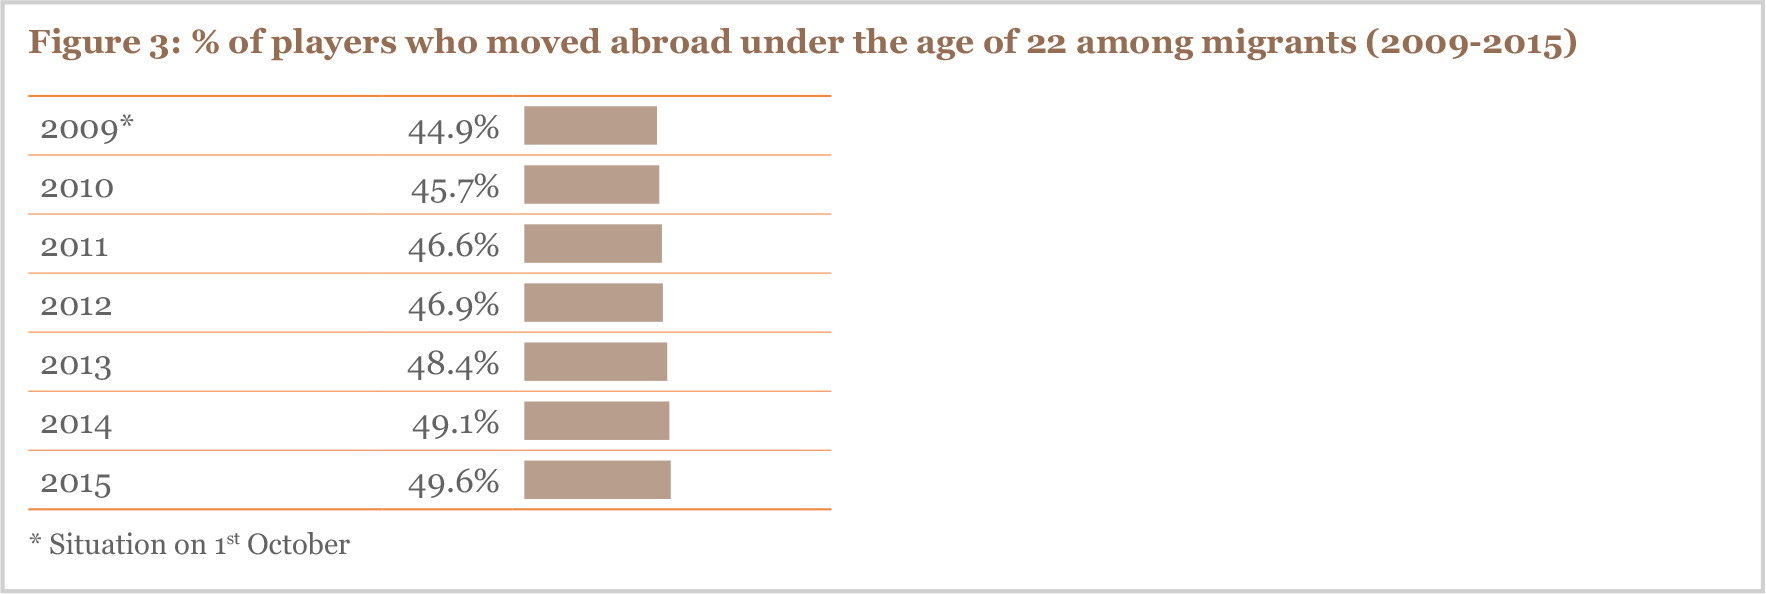 % of players who moved abroad under the age of 22 among migrants (2009-2015)